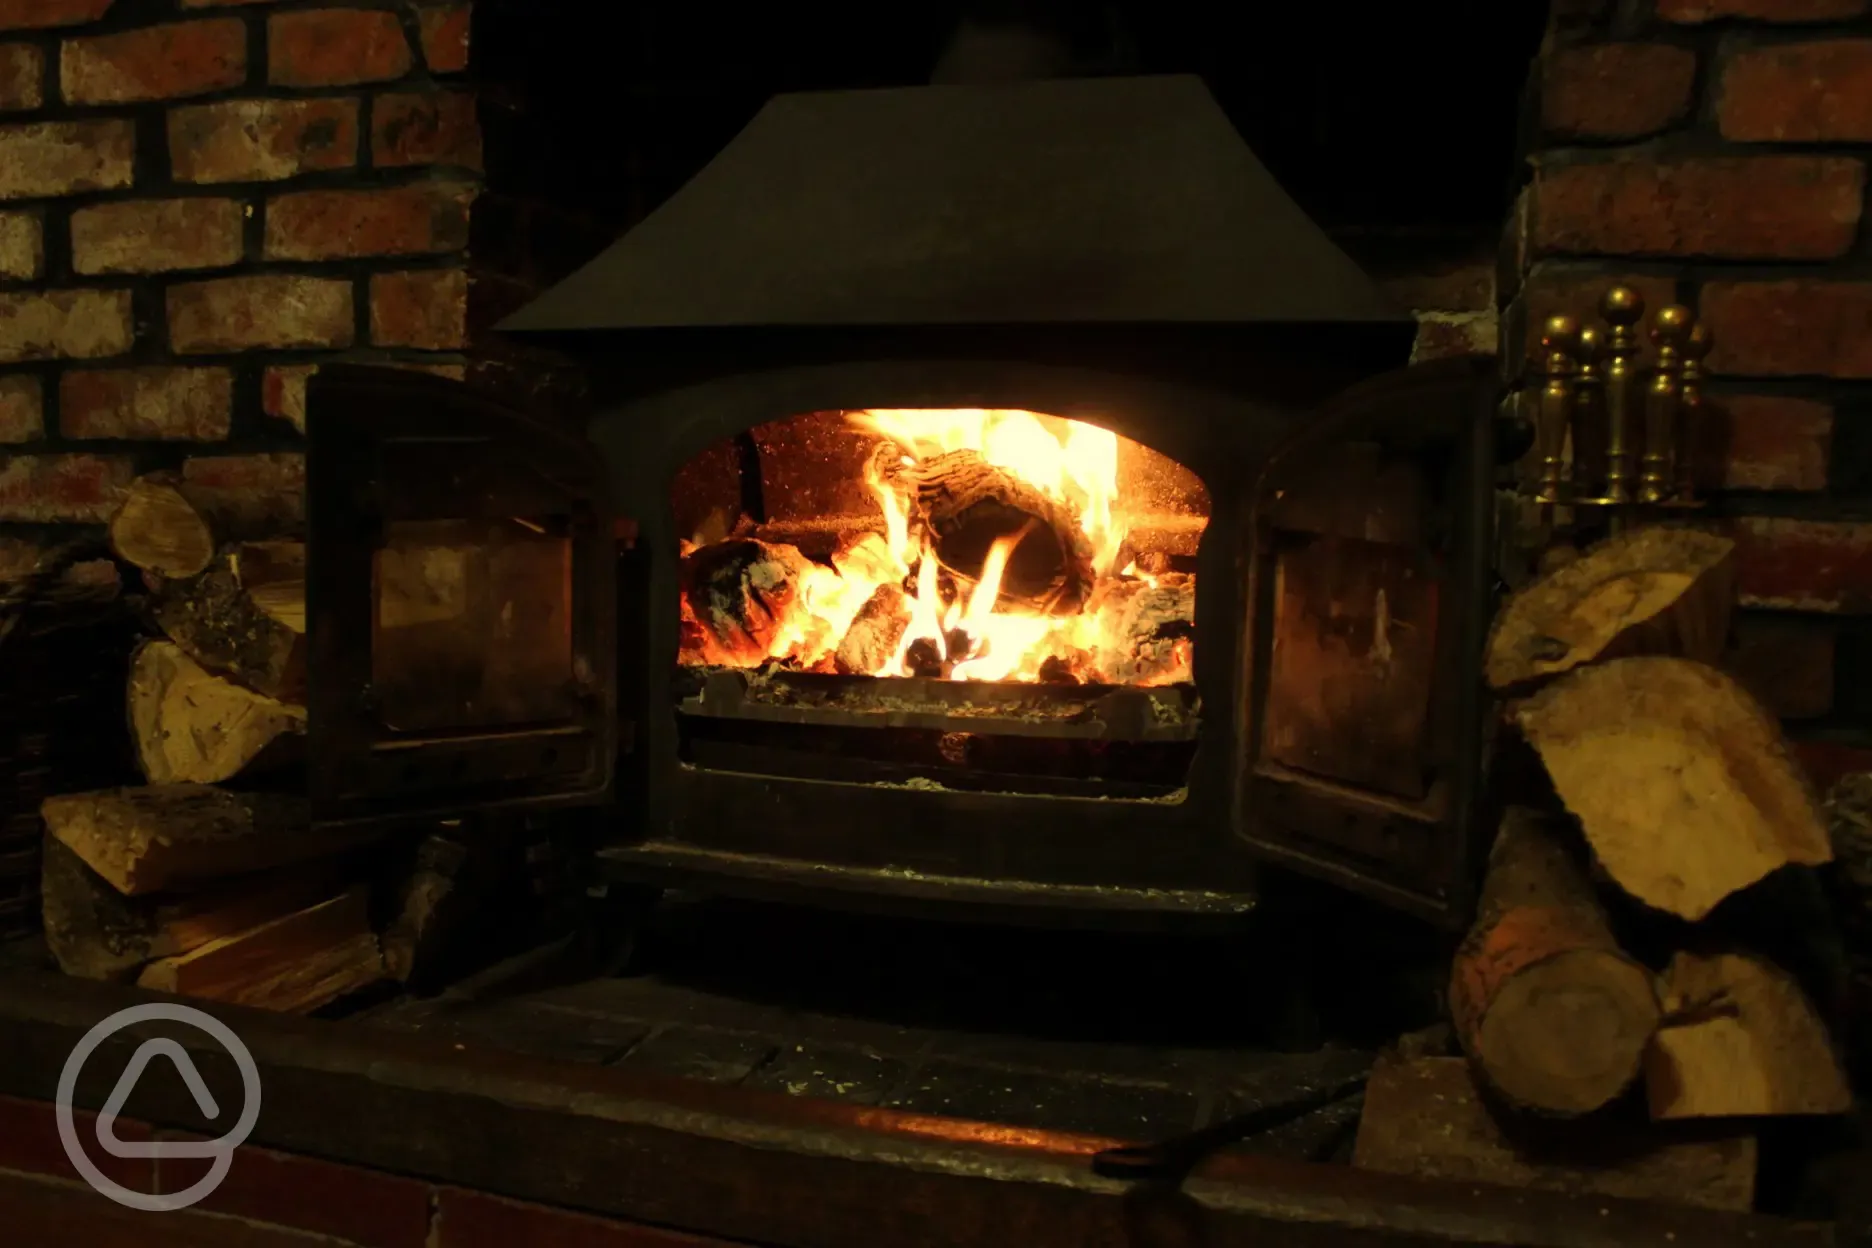 The site's log fire